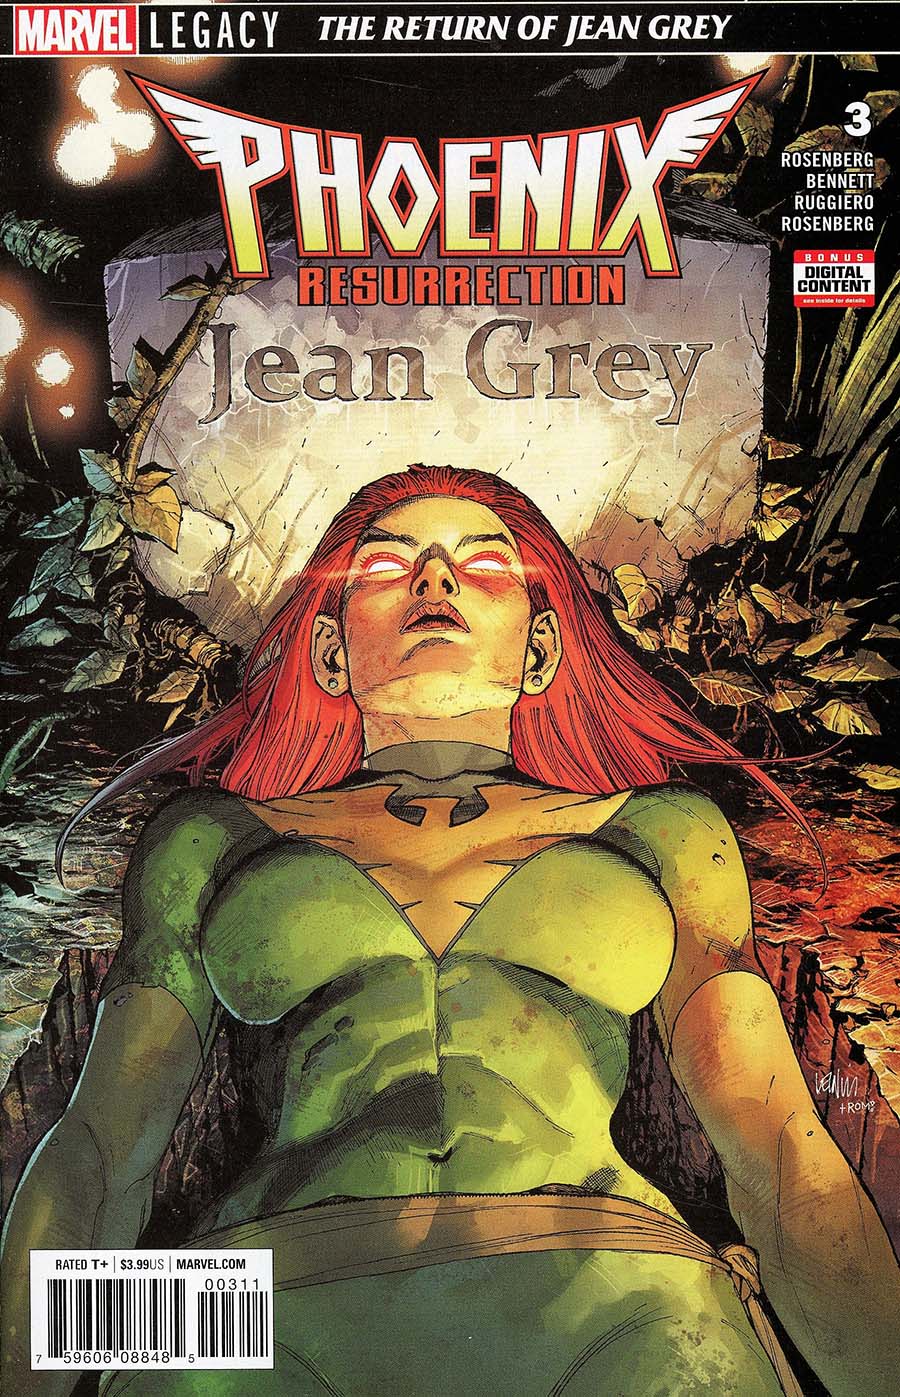 Phoenix Resurrection Return Of (Adult) Jean Grey #3 Cover A Regular Leinil Francis Yu Cover (Marvel Legacy Tie-In)